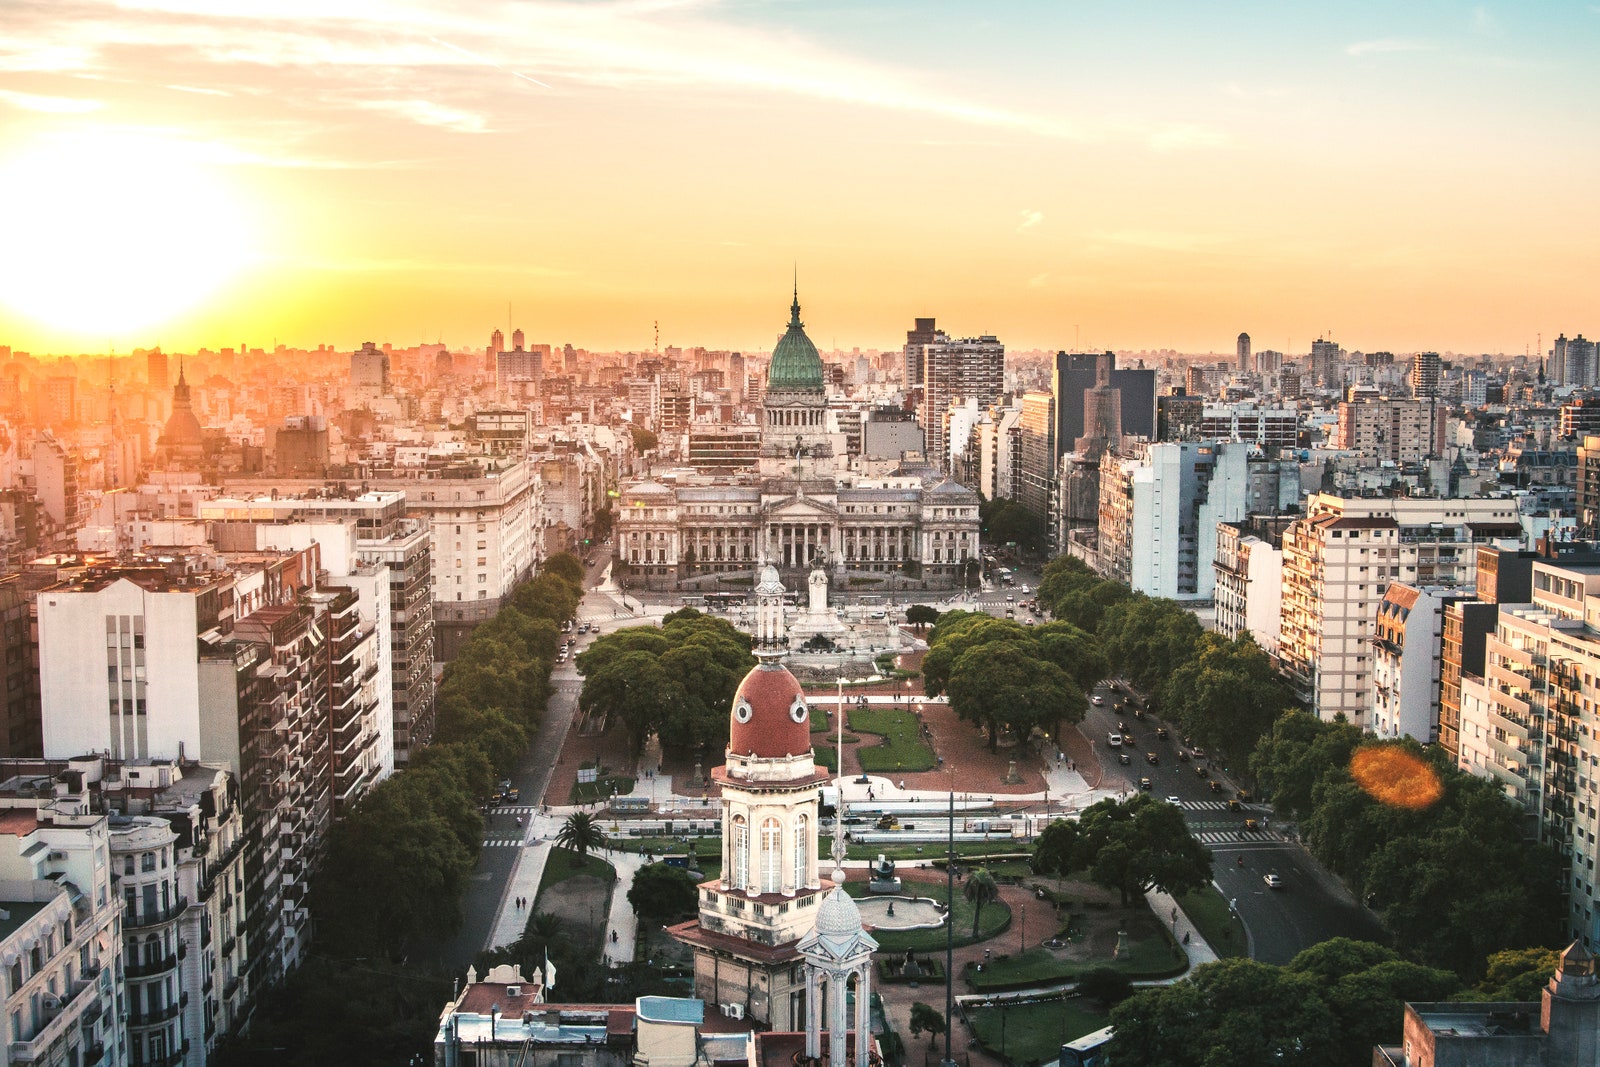 Do You Know a Little Bit About Everything When It Comes to Geography? Buenos Aires, Argentina